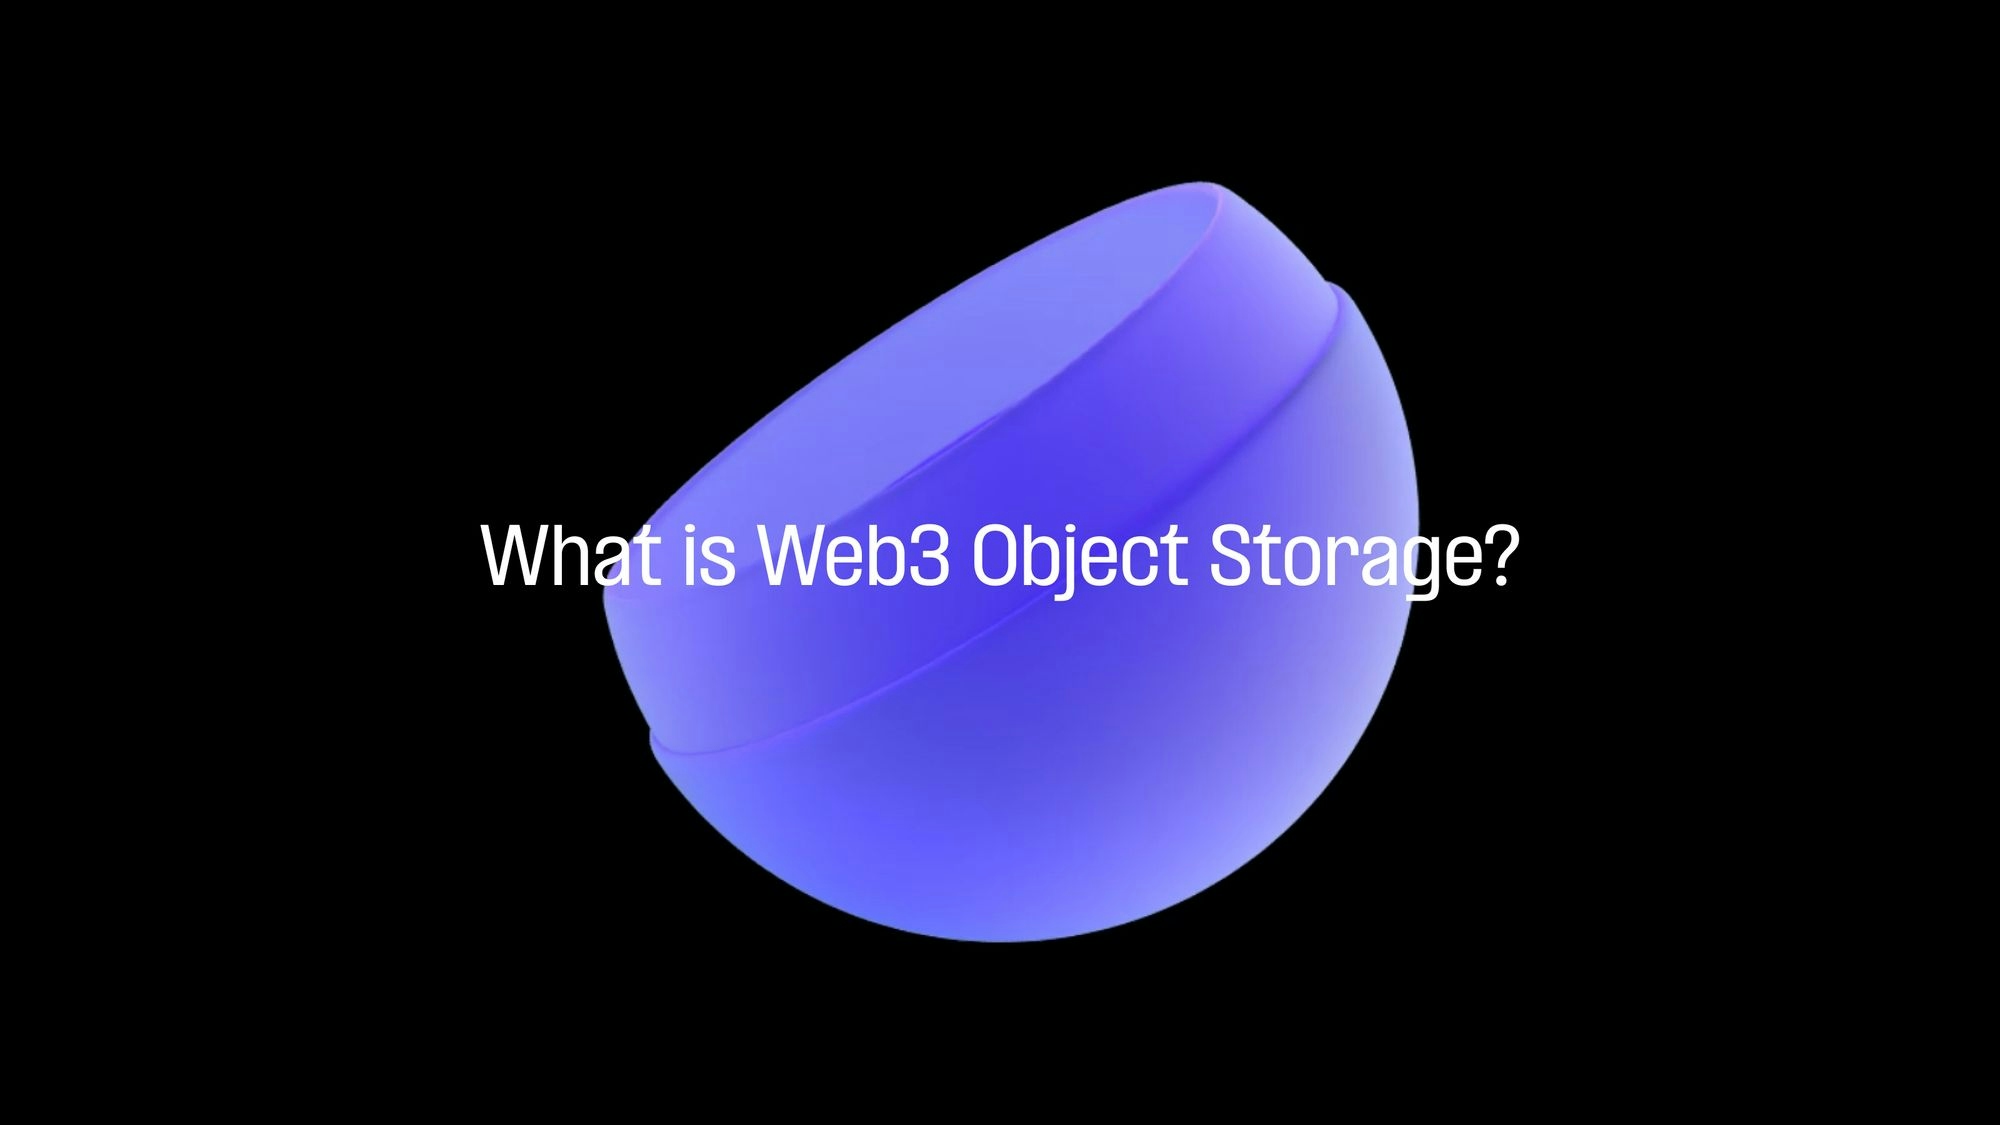 What is Web3 Object Storage?